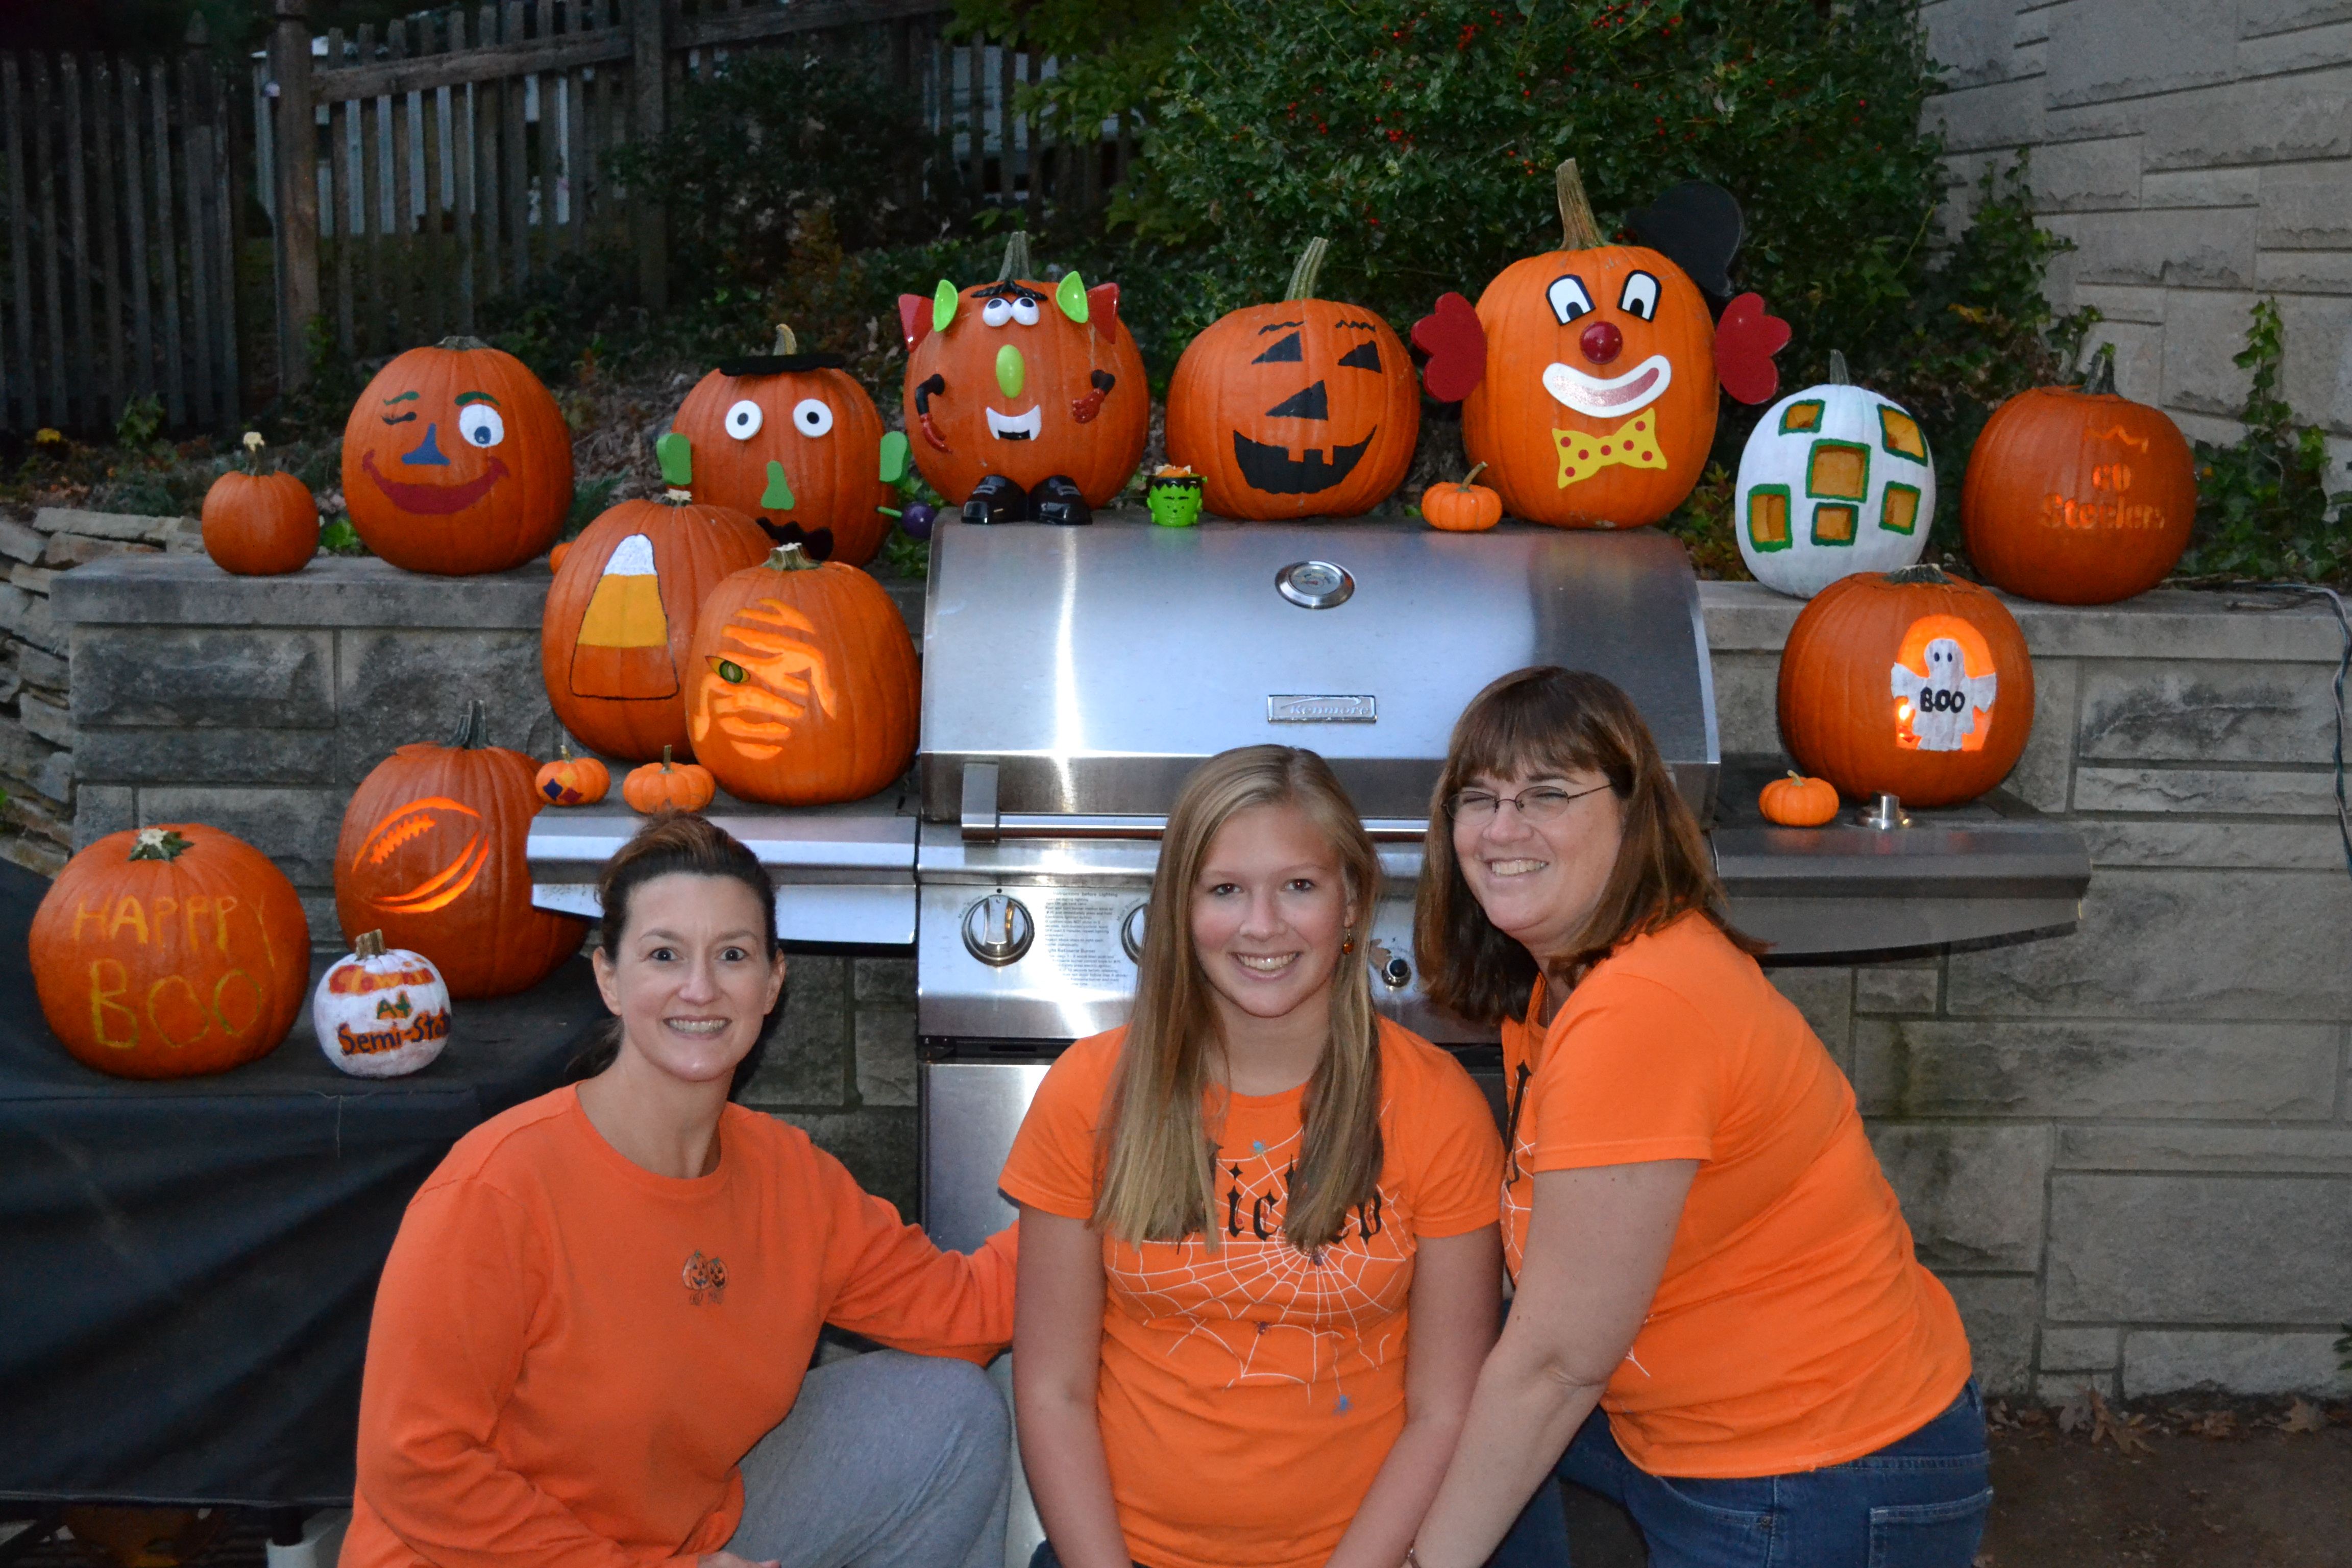 Sandy, her daughter Courtney, her friend Donna and painted pumkins